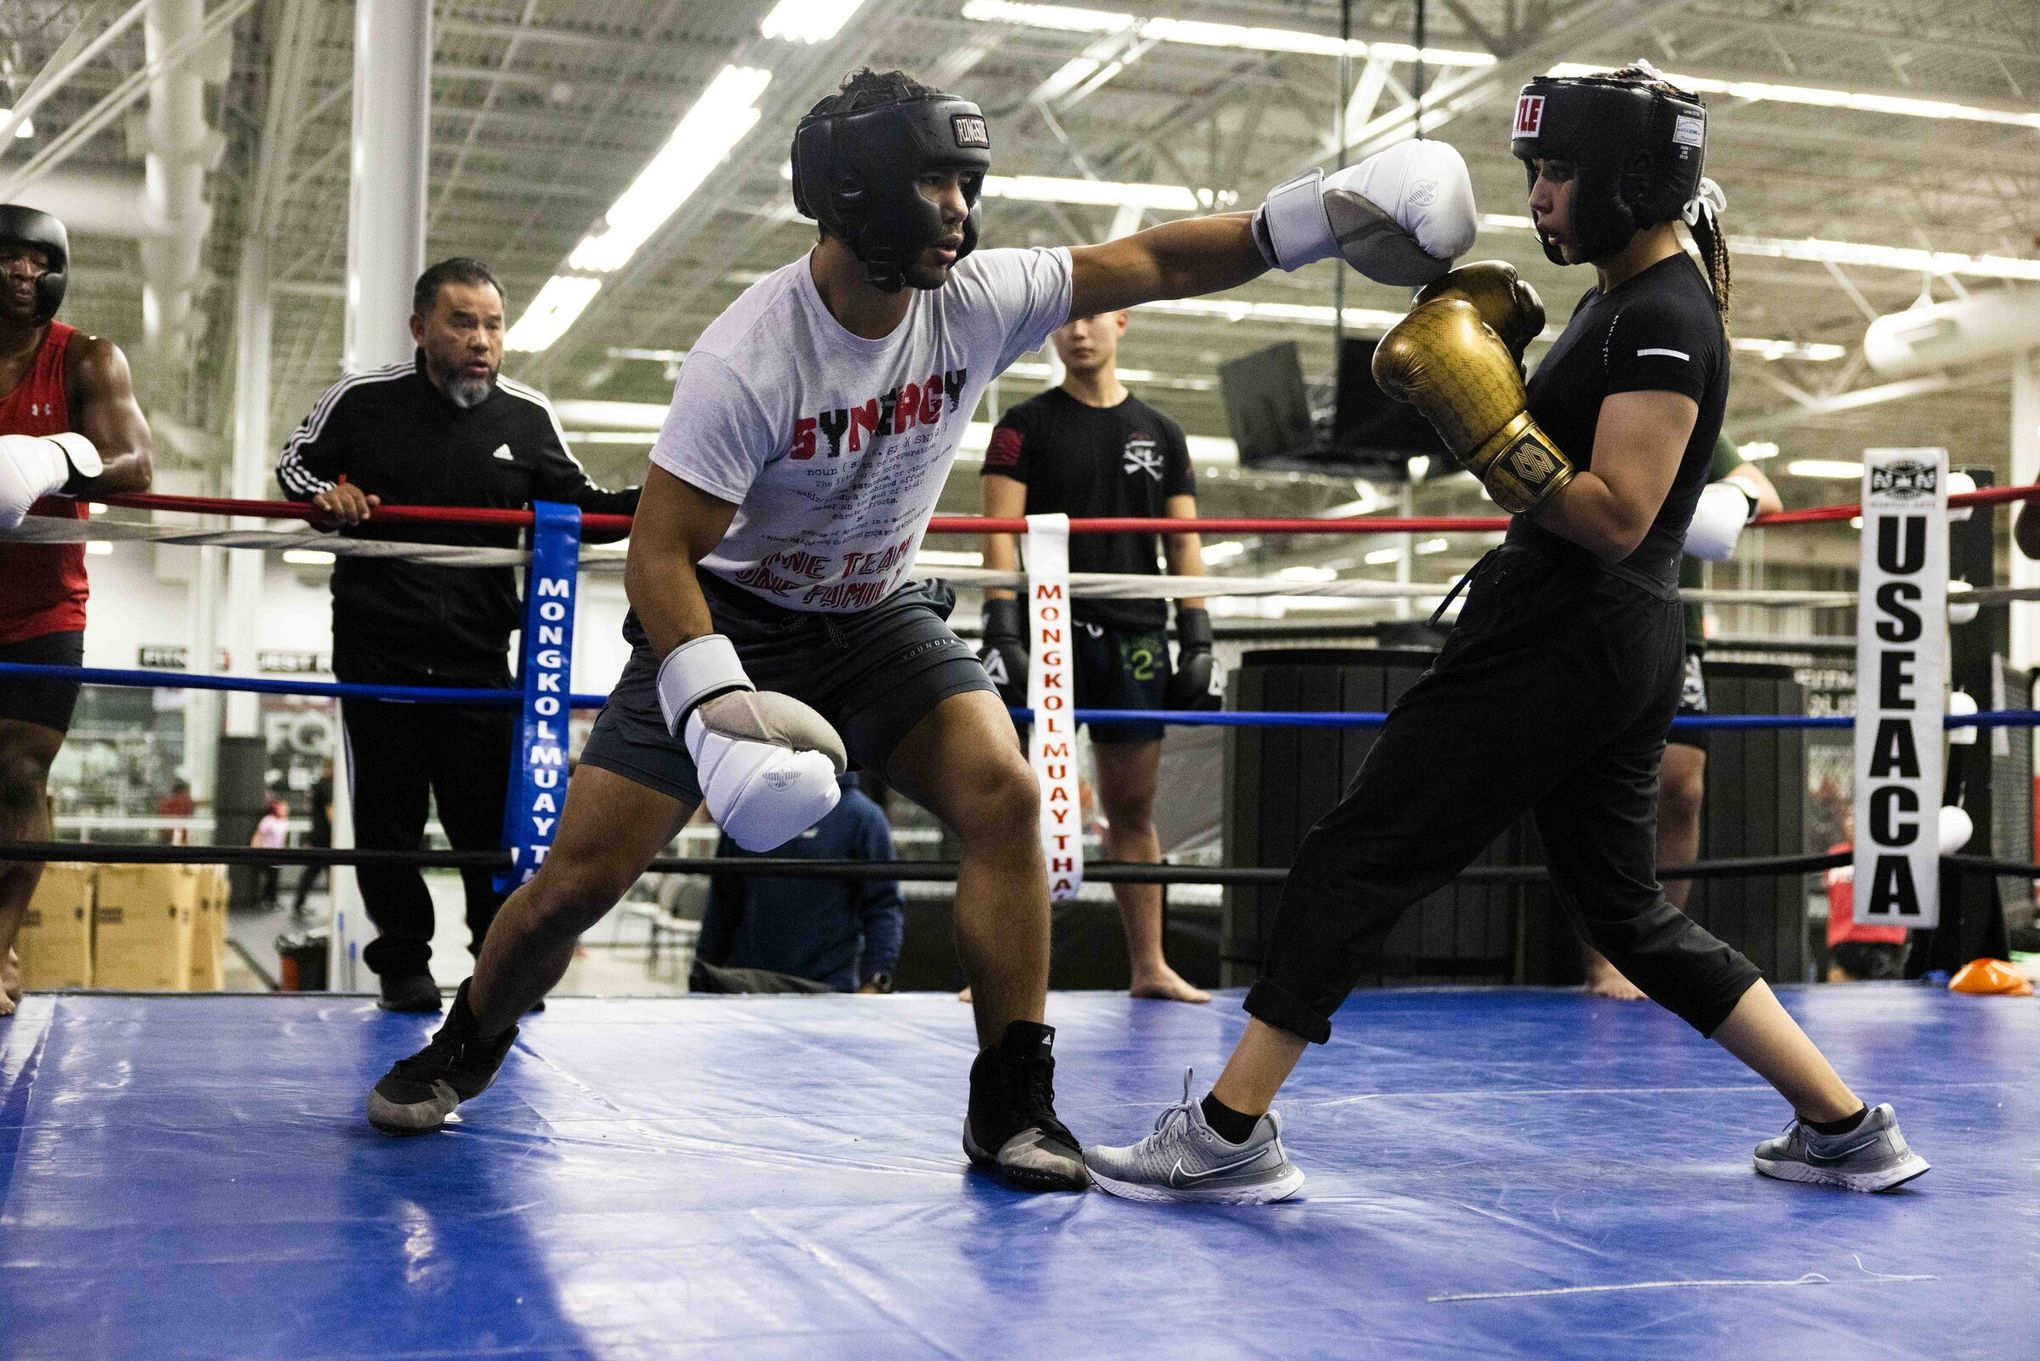 Afghan woman in Seattle area fights to become Olympic boxer